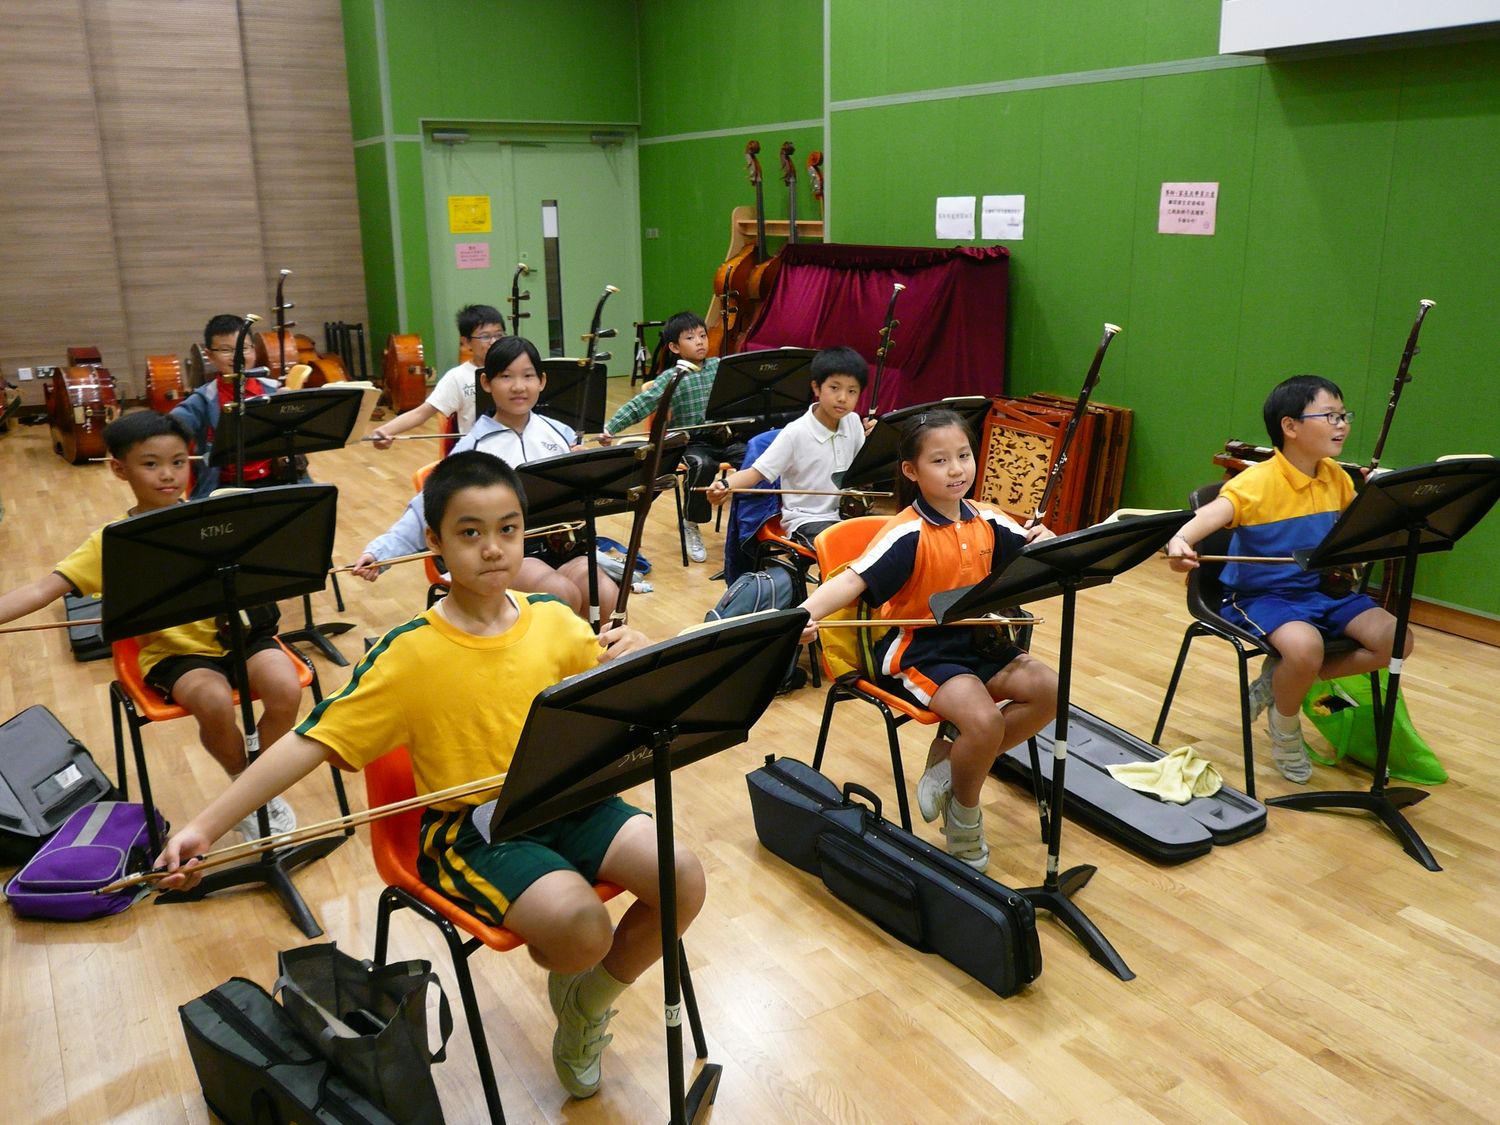 What Aspects Of Music Theory And Music Learning Were First Developed In China?